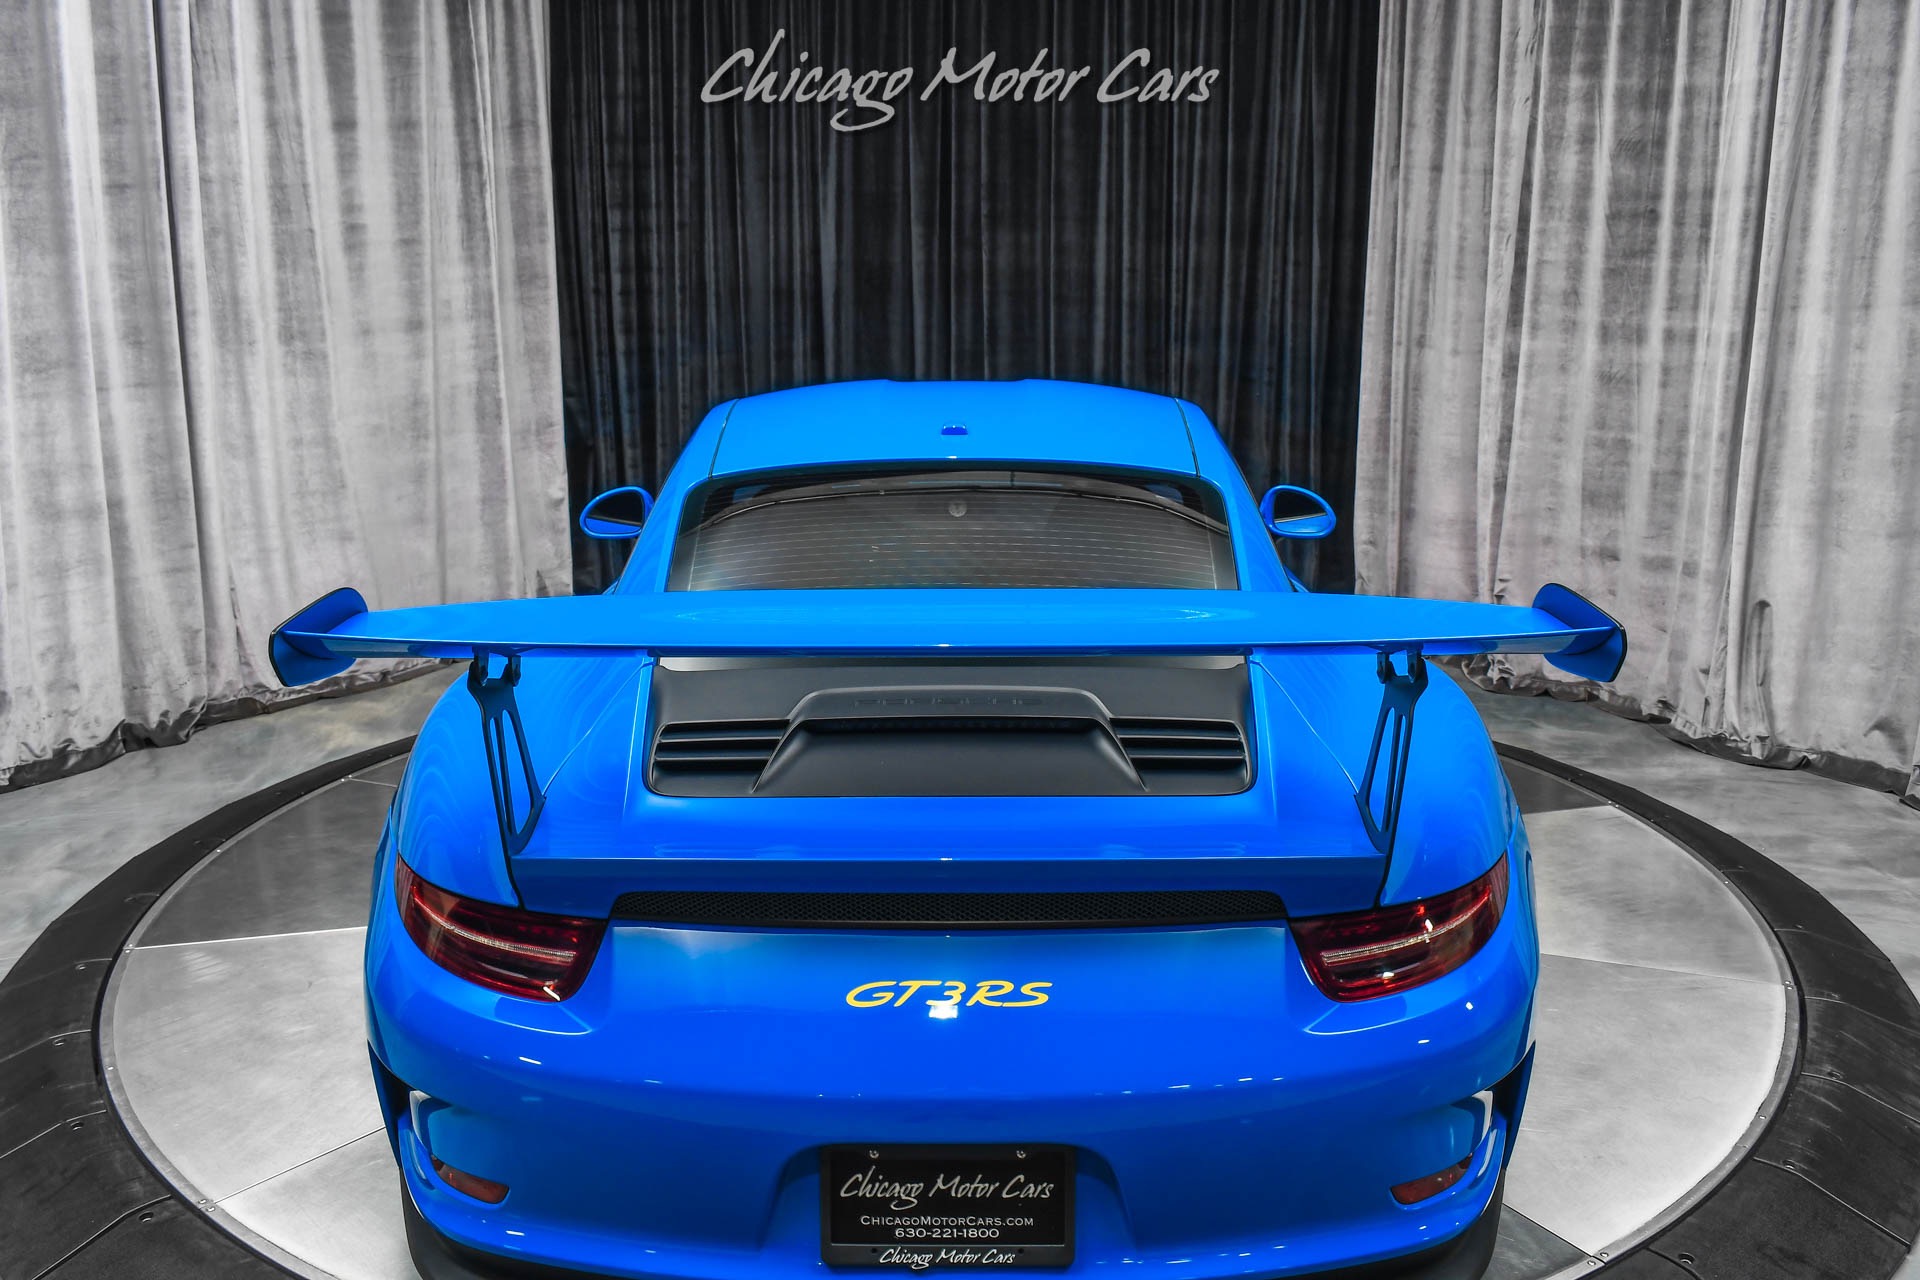 Used-2016-Porsche-911-GT3-RS-PTS-Voodoo-Blue-ONLY-2900-Miles-Front-Lift-FULL-PPF-LOADED-PERFEC